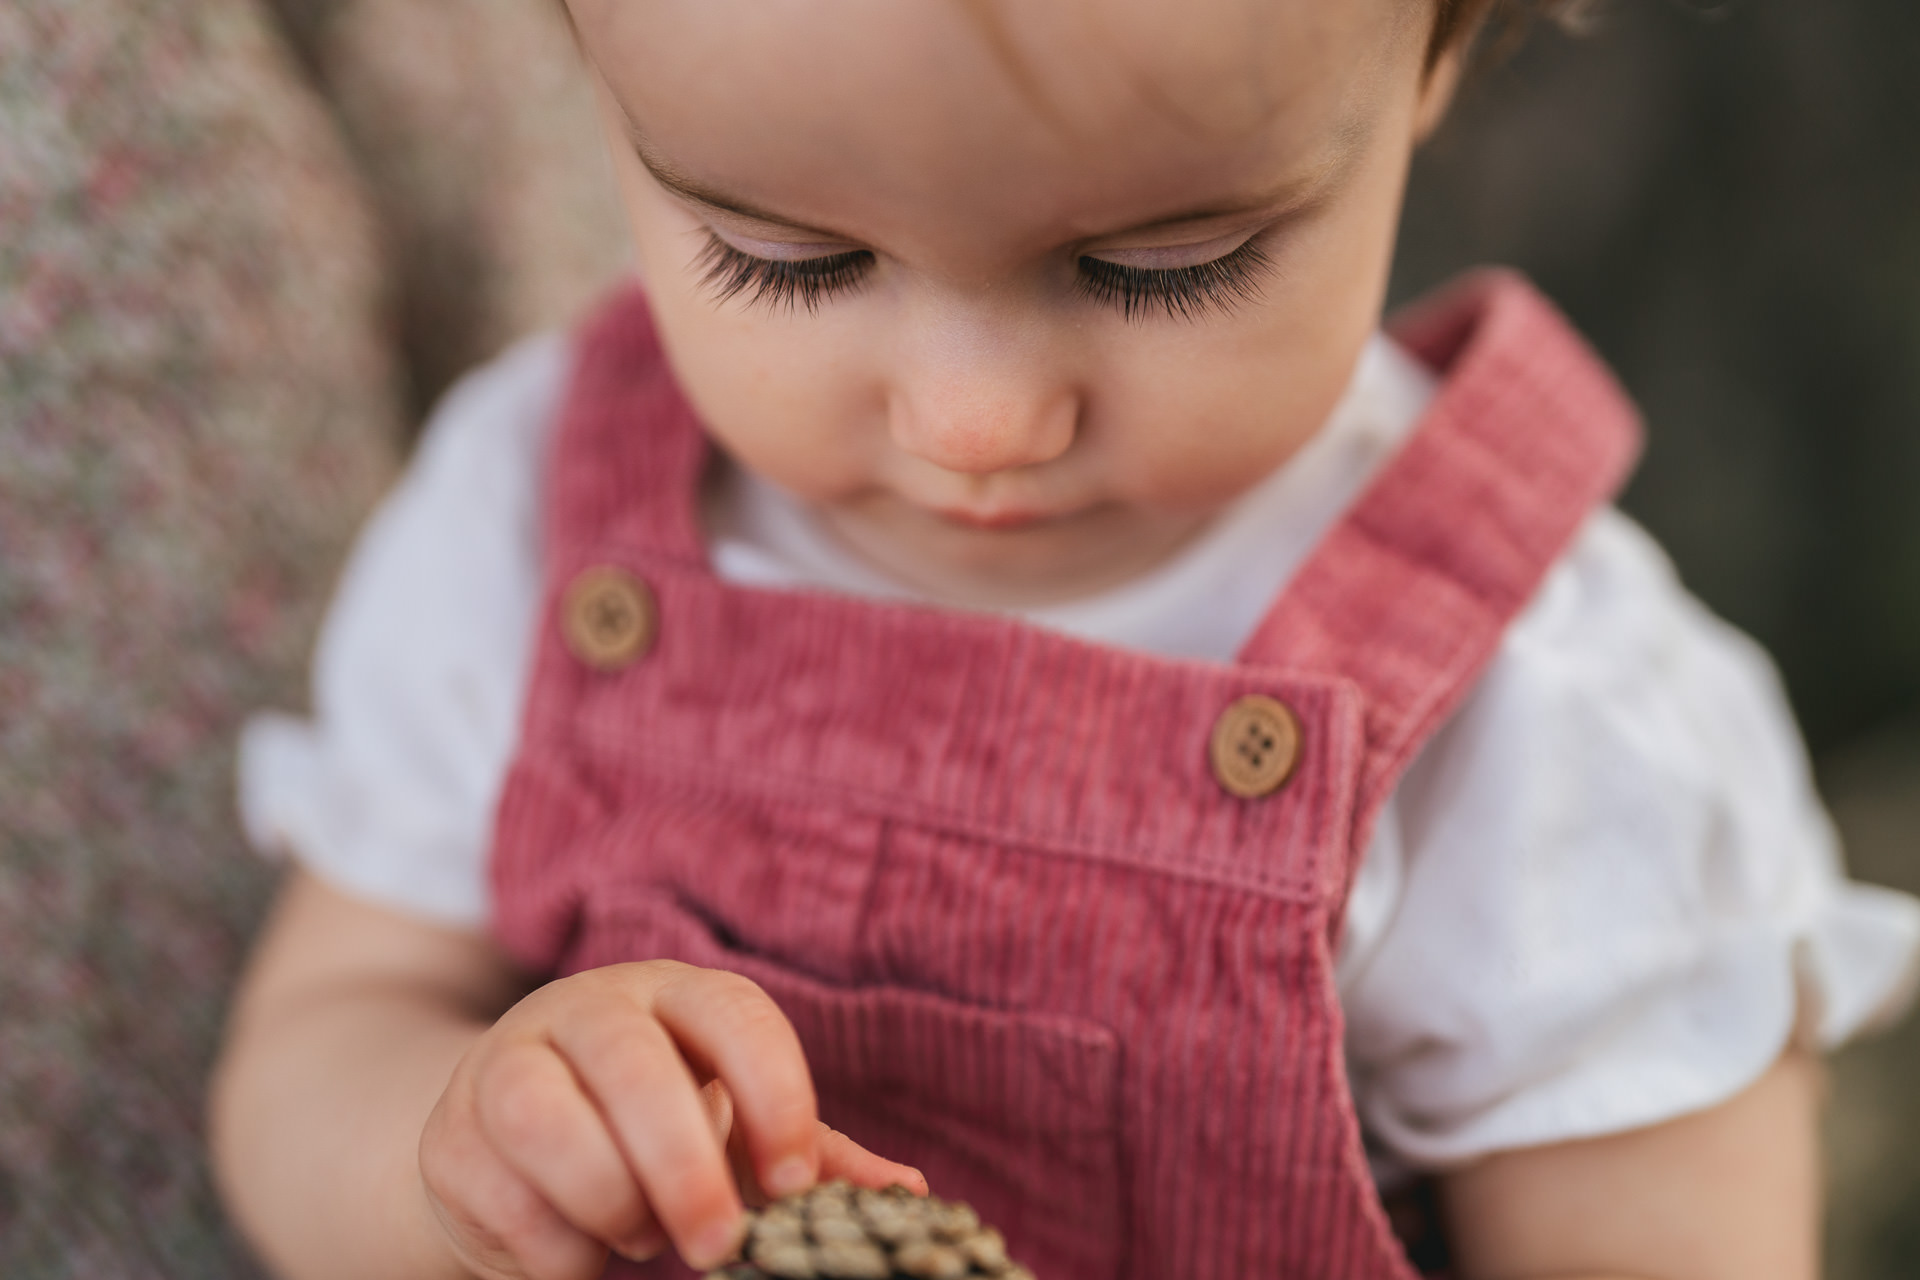 Close up photo of a baby girl in a pink dress with focus on her eyelashes